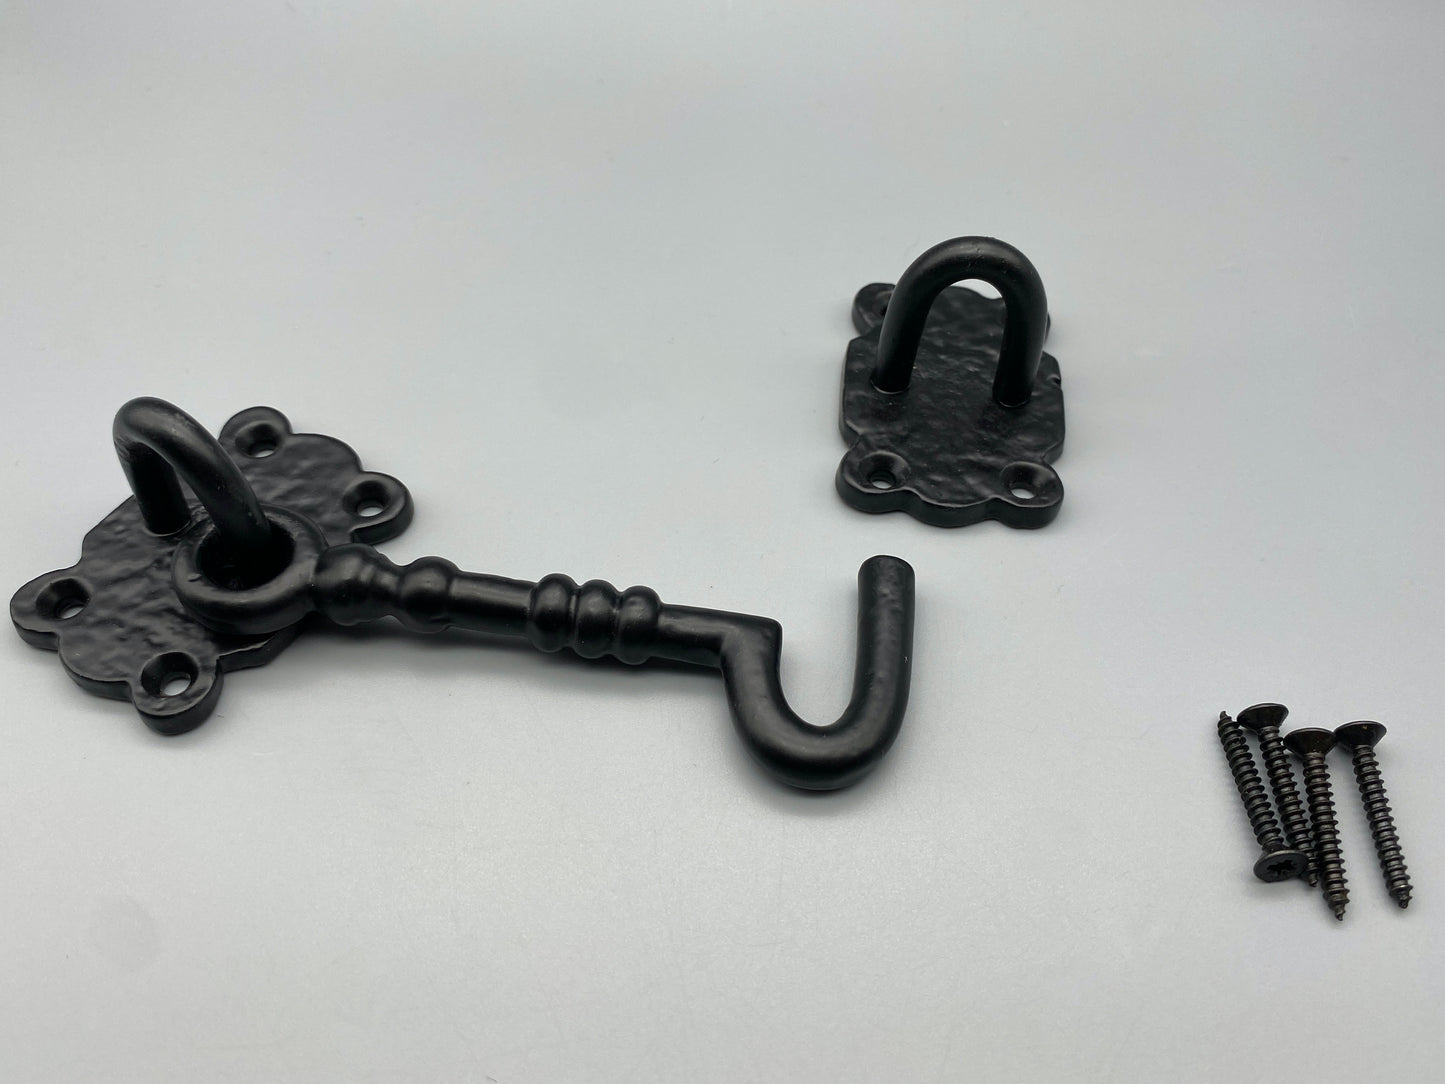 Forged Black Cabin Hook - Antiqued Style Gothic Cabin Hooks - 100mm (4" inch) & 150mm (6" inch)